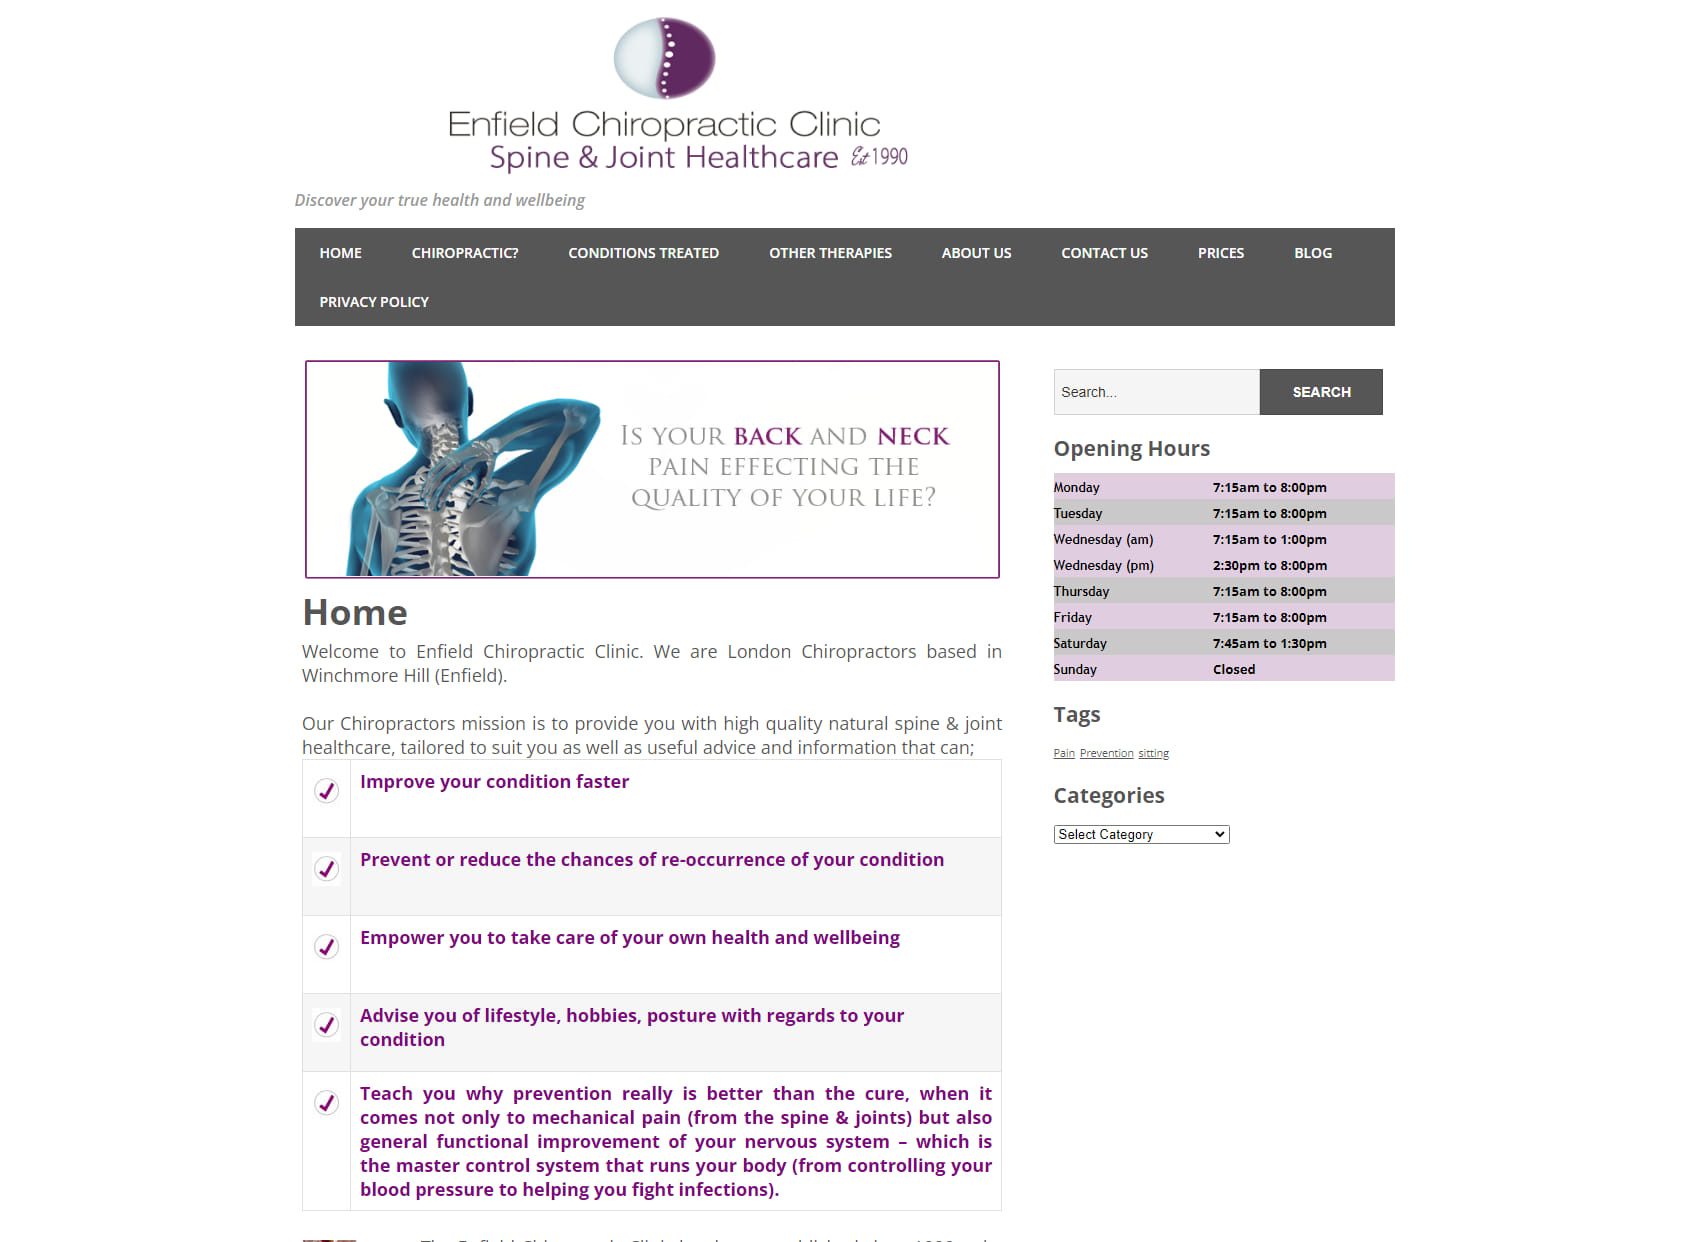 Enfield Chiropractic Clinic